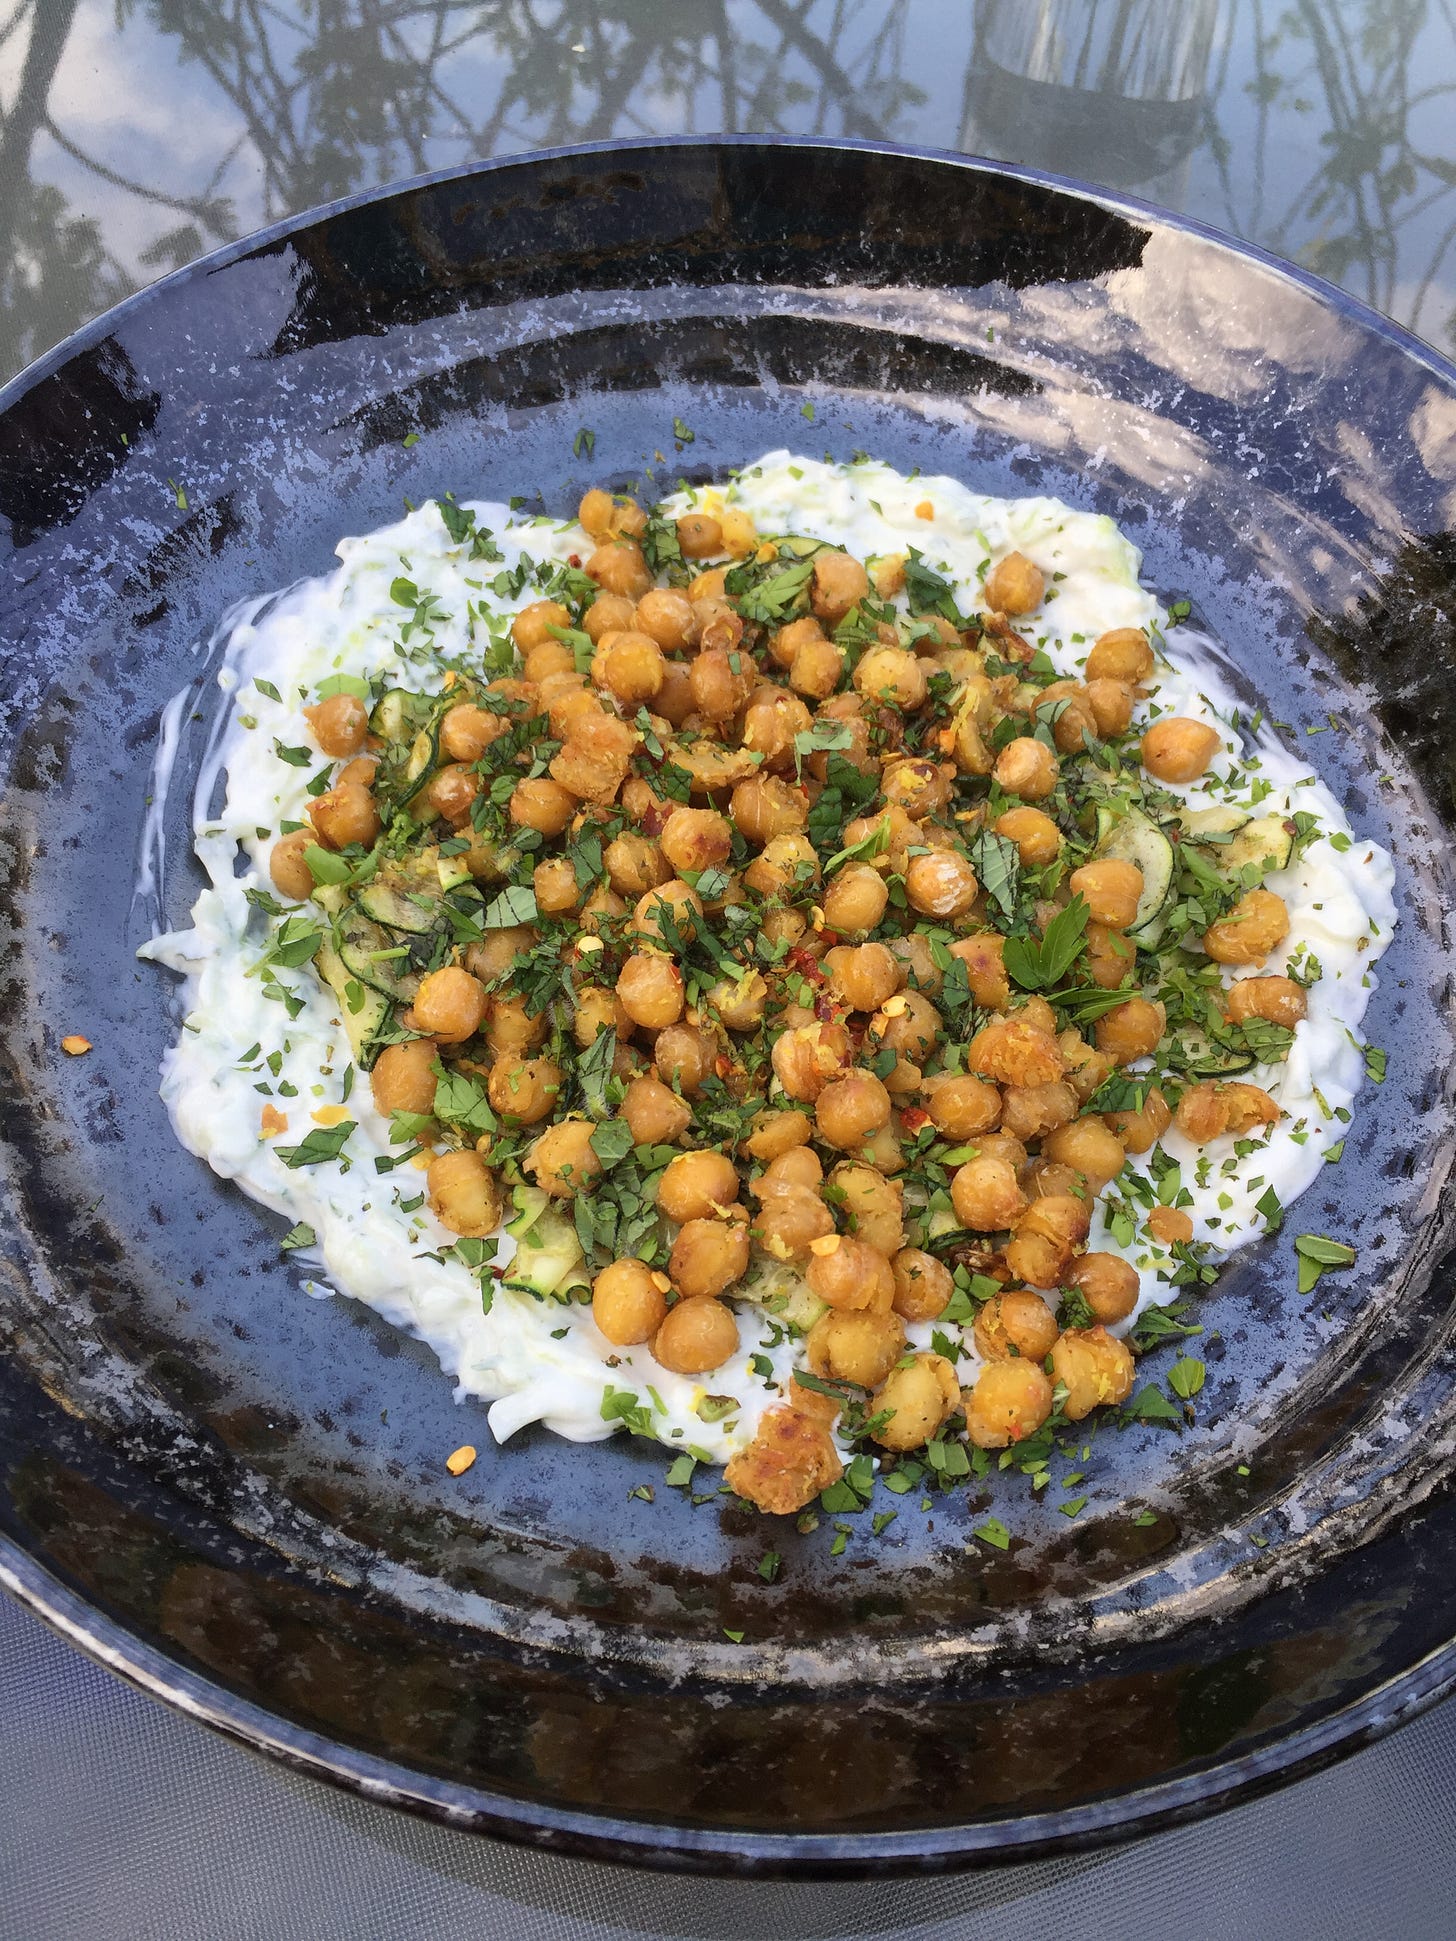 On a glass patio table, a shallow black speckled dish with tzatziki spread in the centre. On top of the dip is sautéed slice of zucchini covered with crispy chickpeas, dusted with herbs and chili flakes.